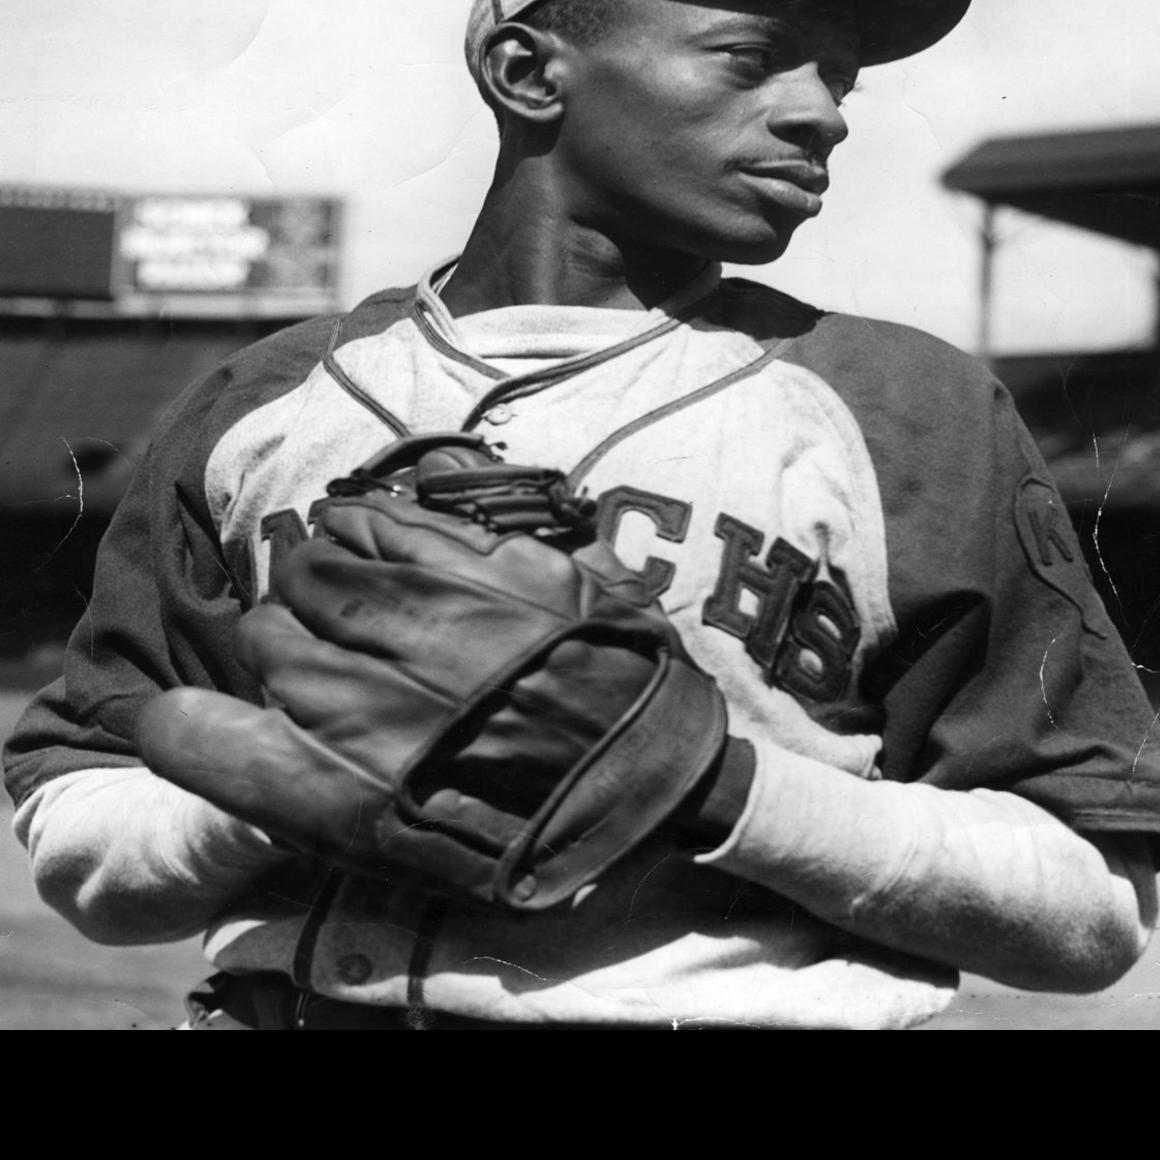 Baseball great Satchel Paige's ties to the Springs, From the Sidelines, The Tribune